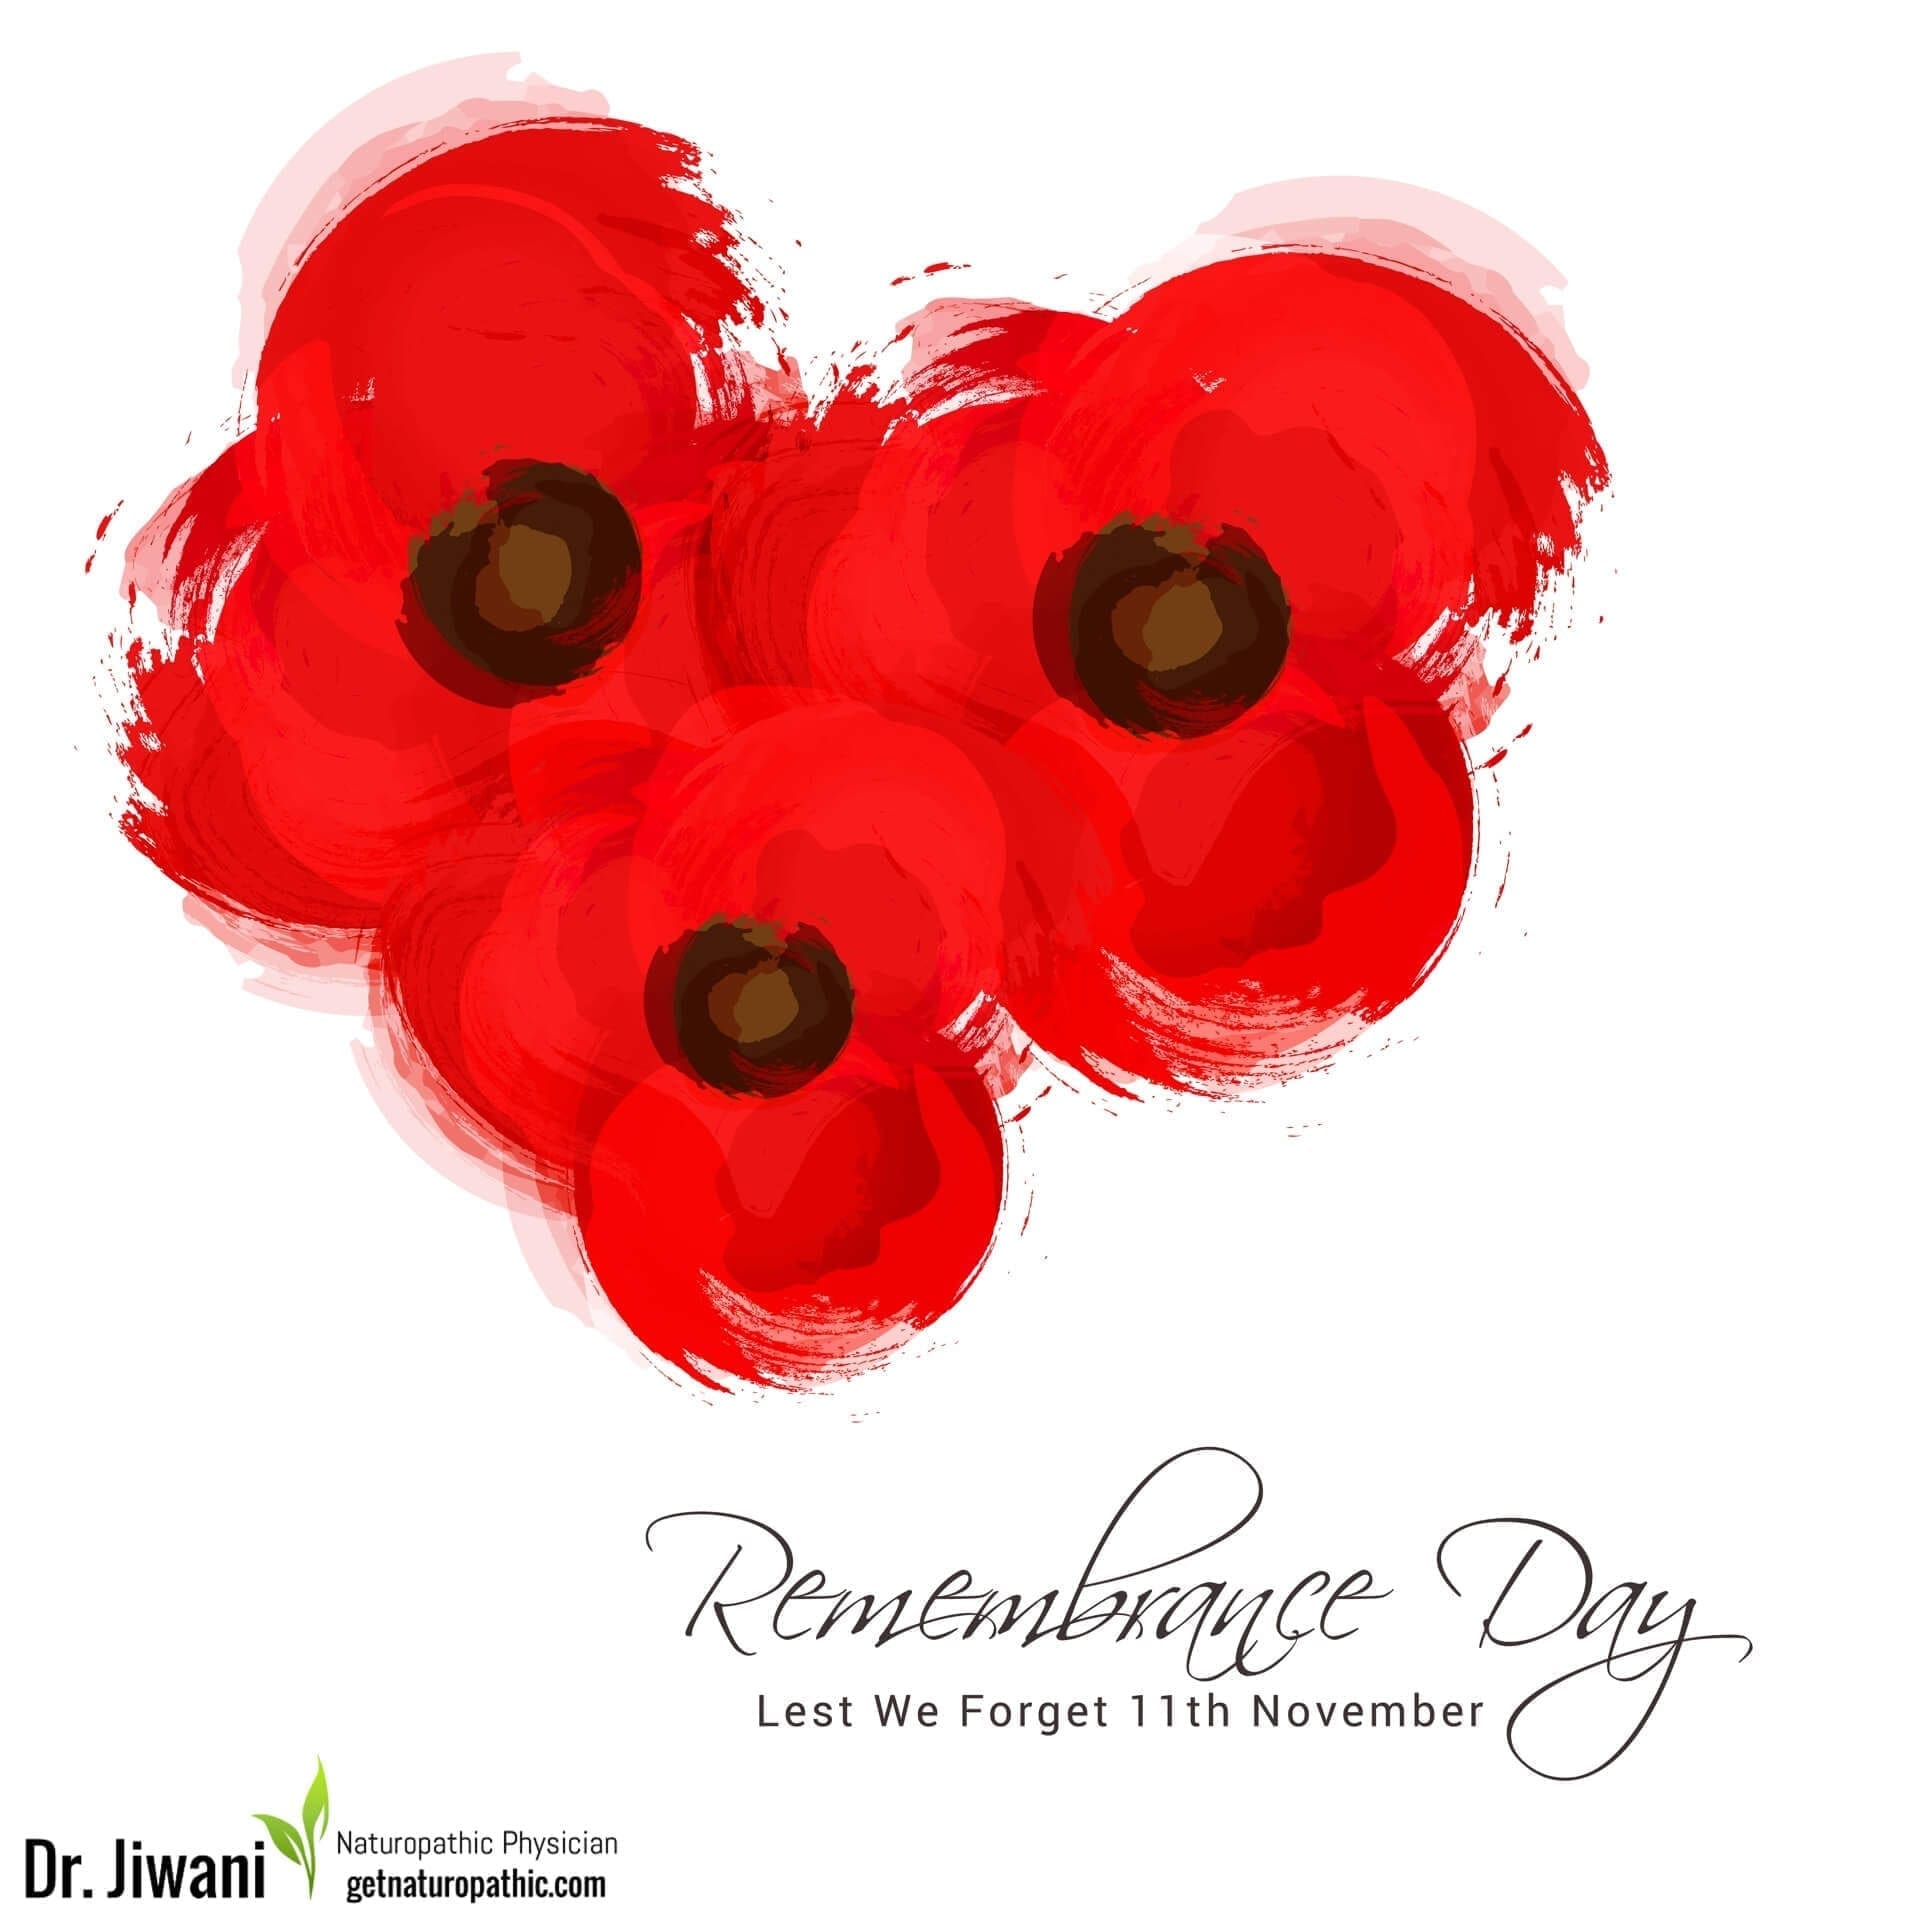 Remembrance Day: Lest We Forget | Dr. Jiwani's Naturopathic Nuggets Blog